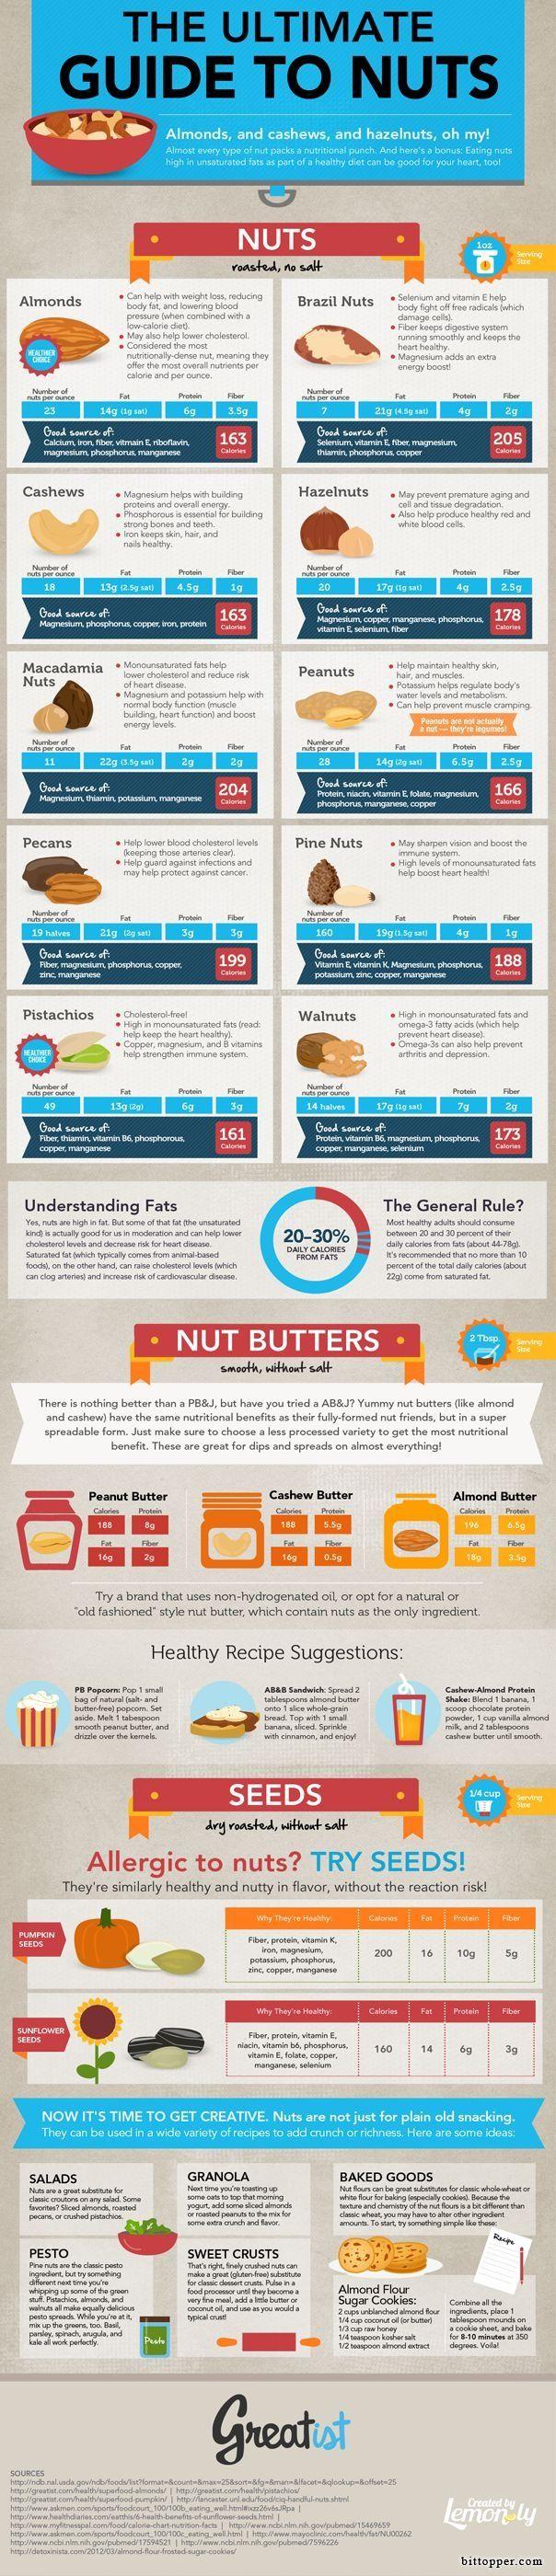 Wedding - The Ultimate Guide To Nuts